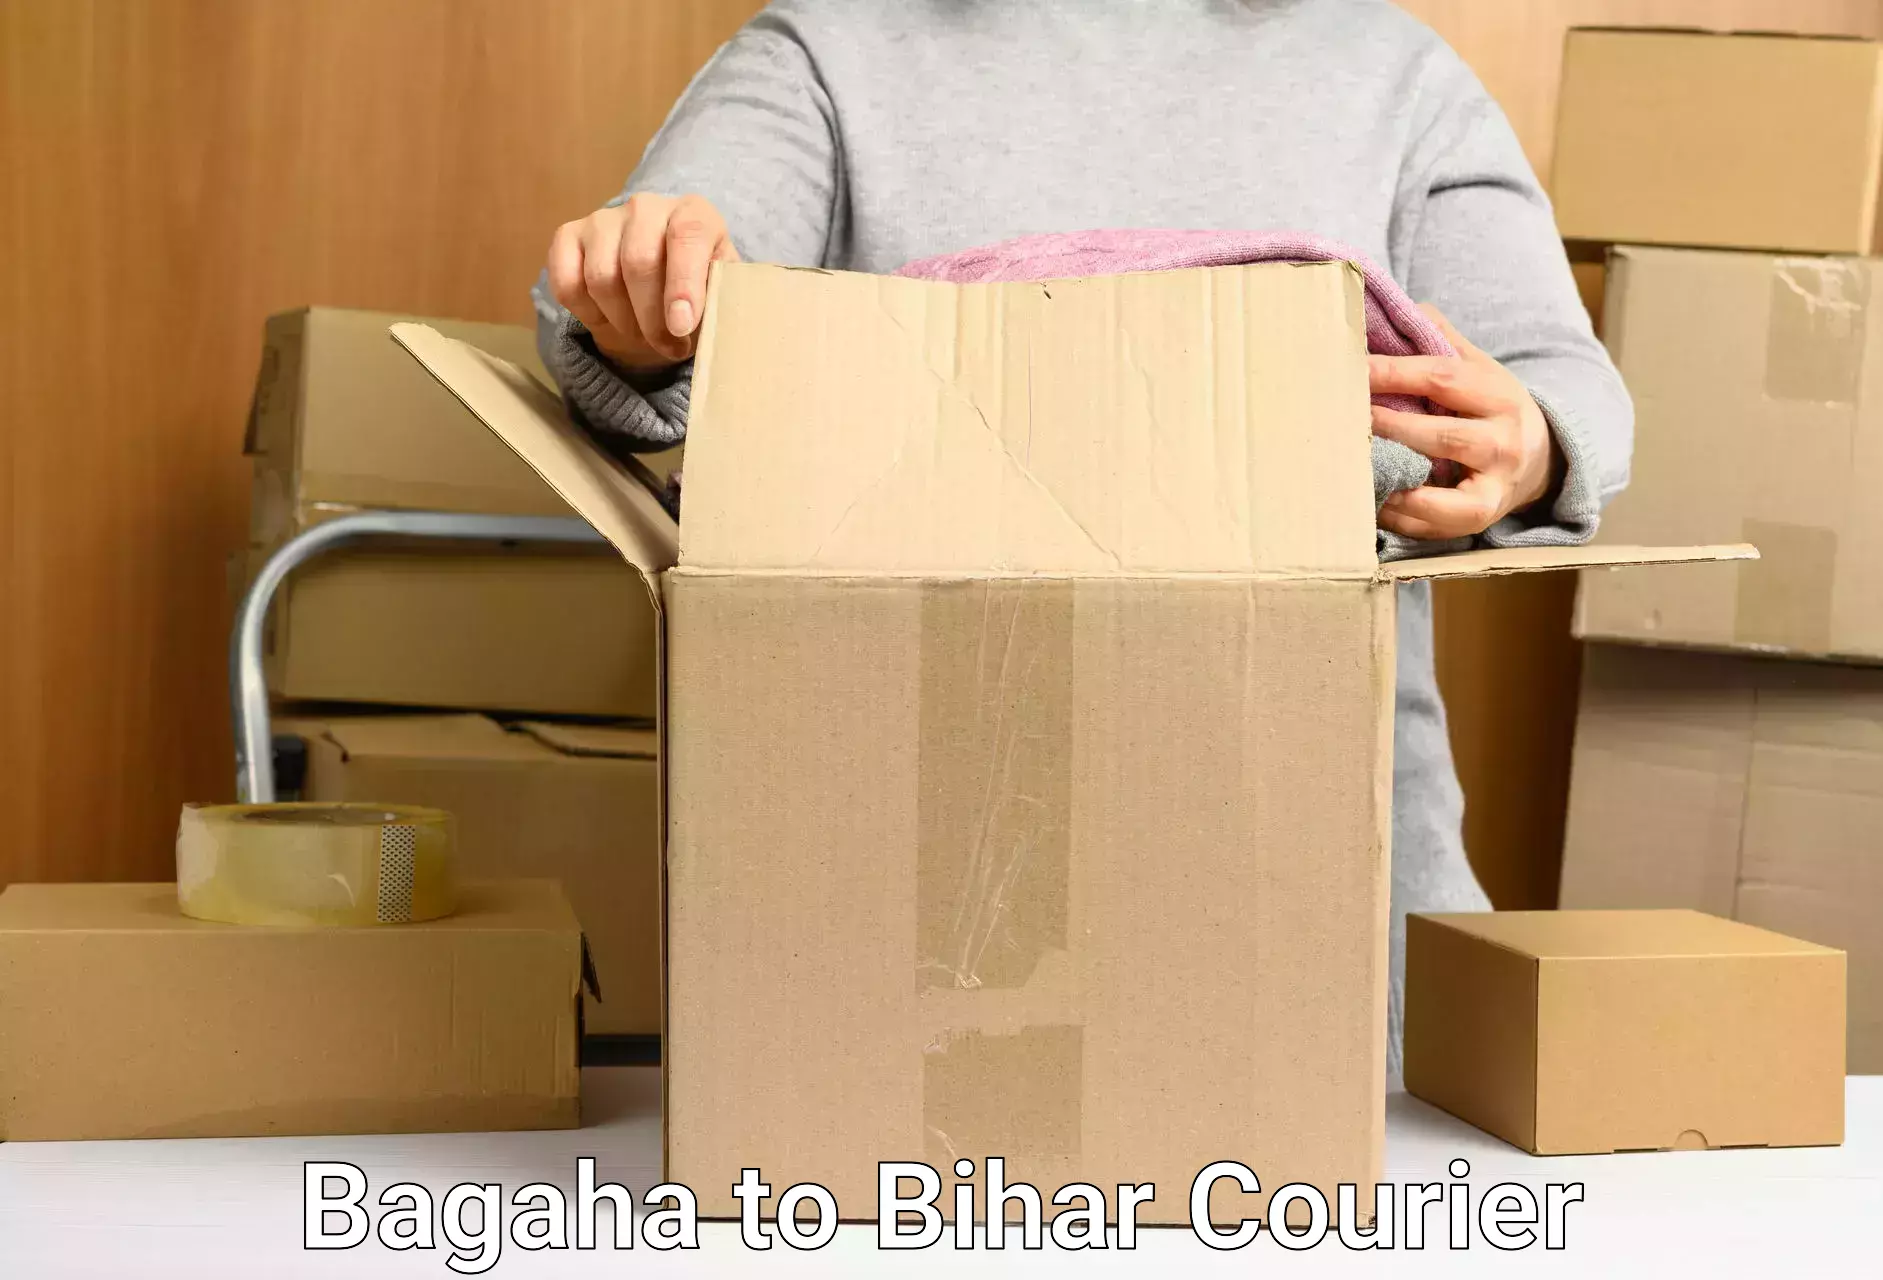 Efficient package consolidation in Bagaha to Bihar